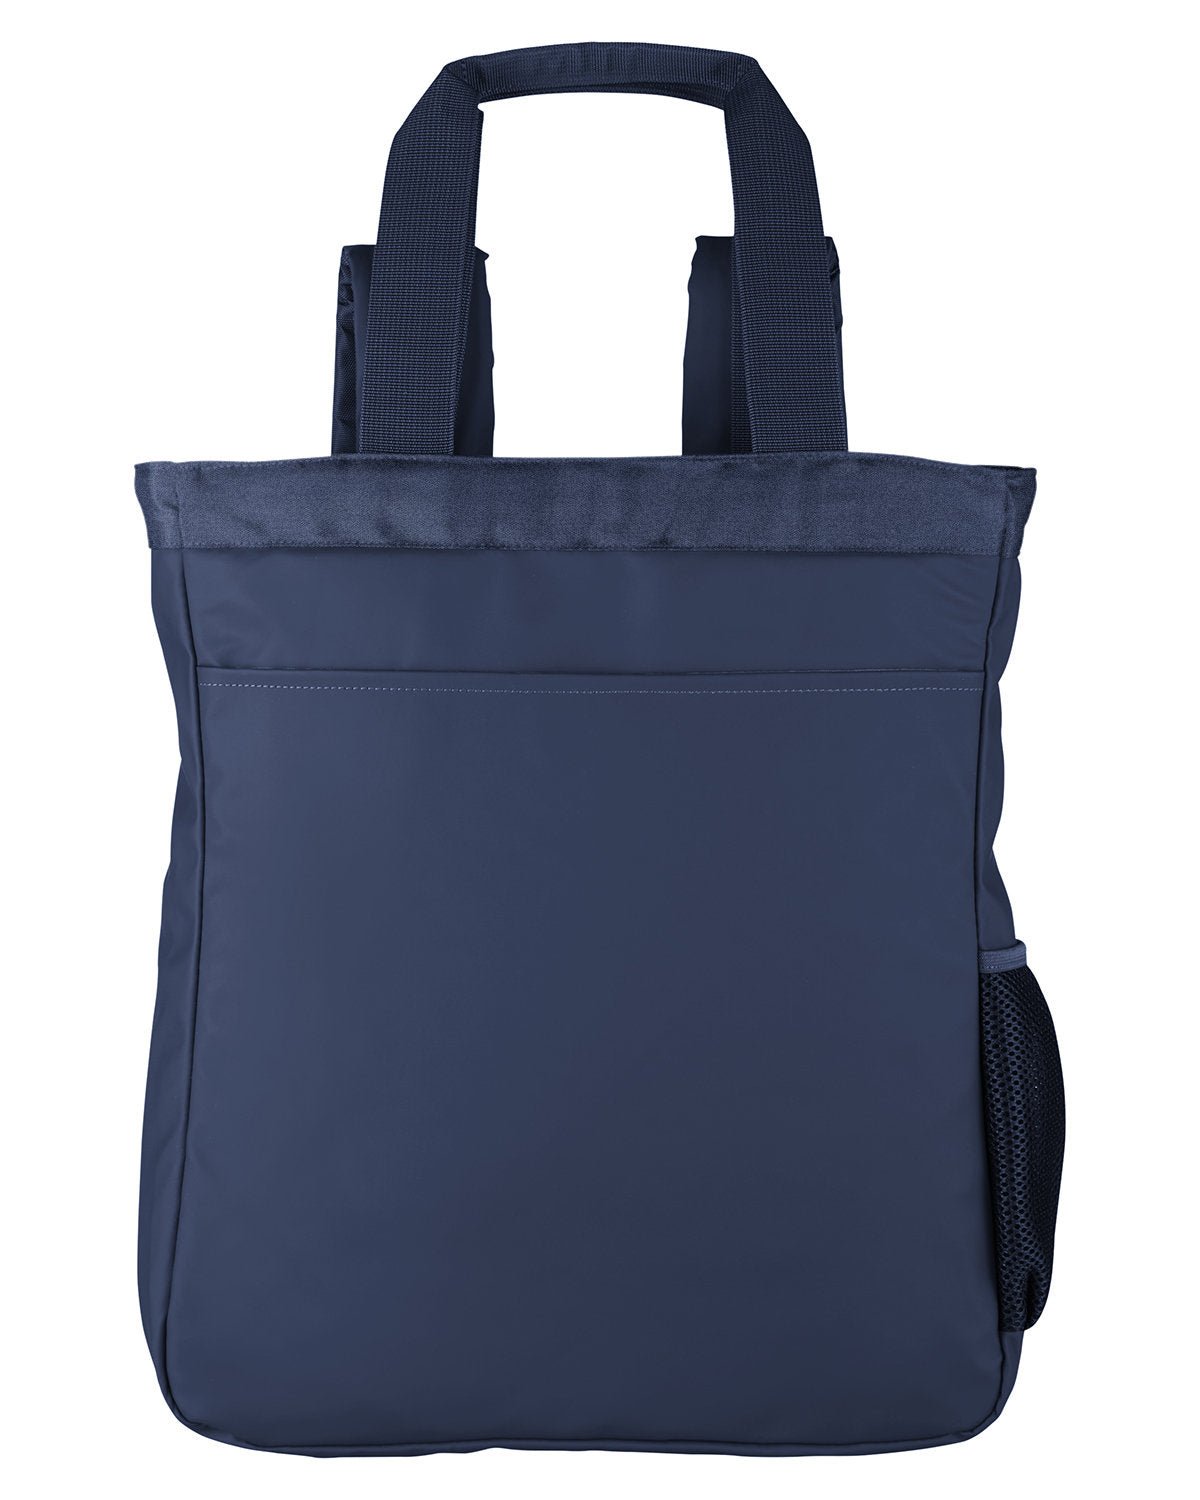 NE901-North End-CLASSIC NAVY-North End-Bags and Accessories-1